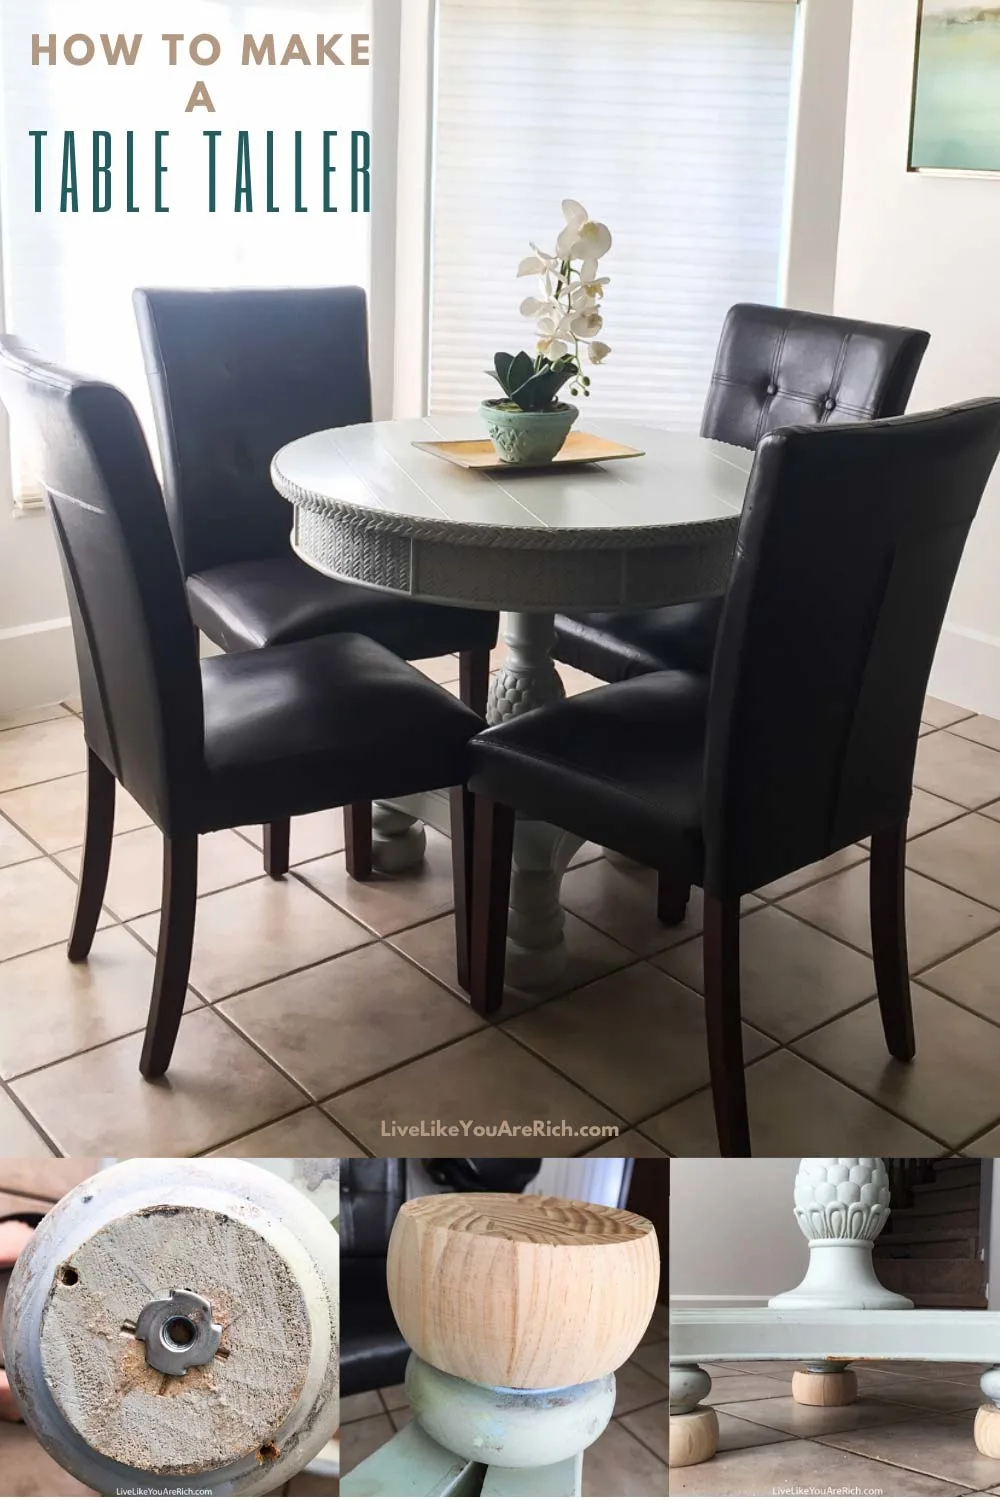 My little table measures just over 30 inches tall and fits my dining chairs perfectly. I have had a guest who is 6’3″ sit at the table comfortably. It has been very functional and was inexpensive, easy, and quick. I hope this is helpful if you need to make a table taller as well! #table #tablemakeover #diy